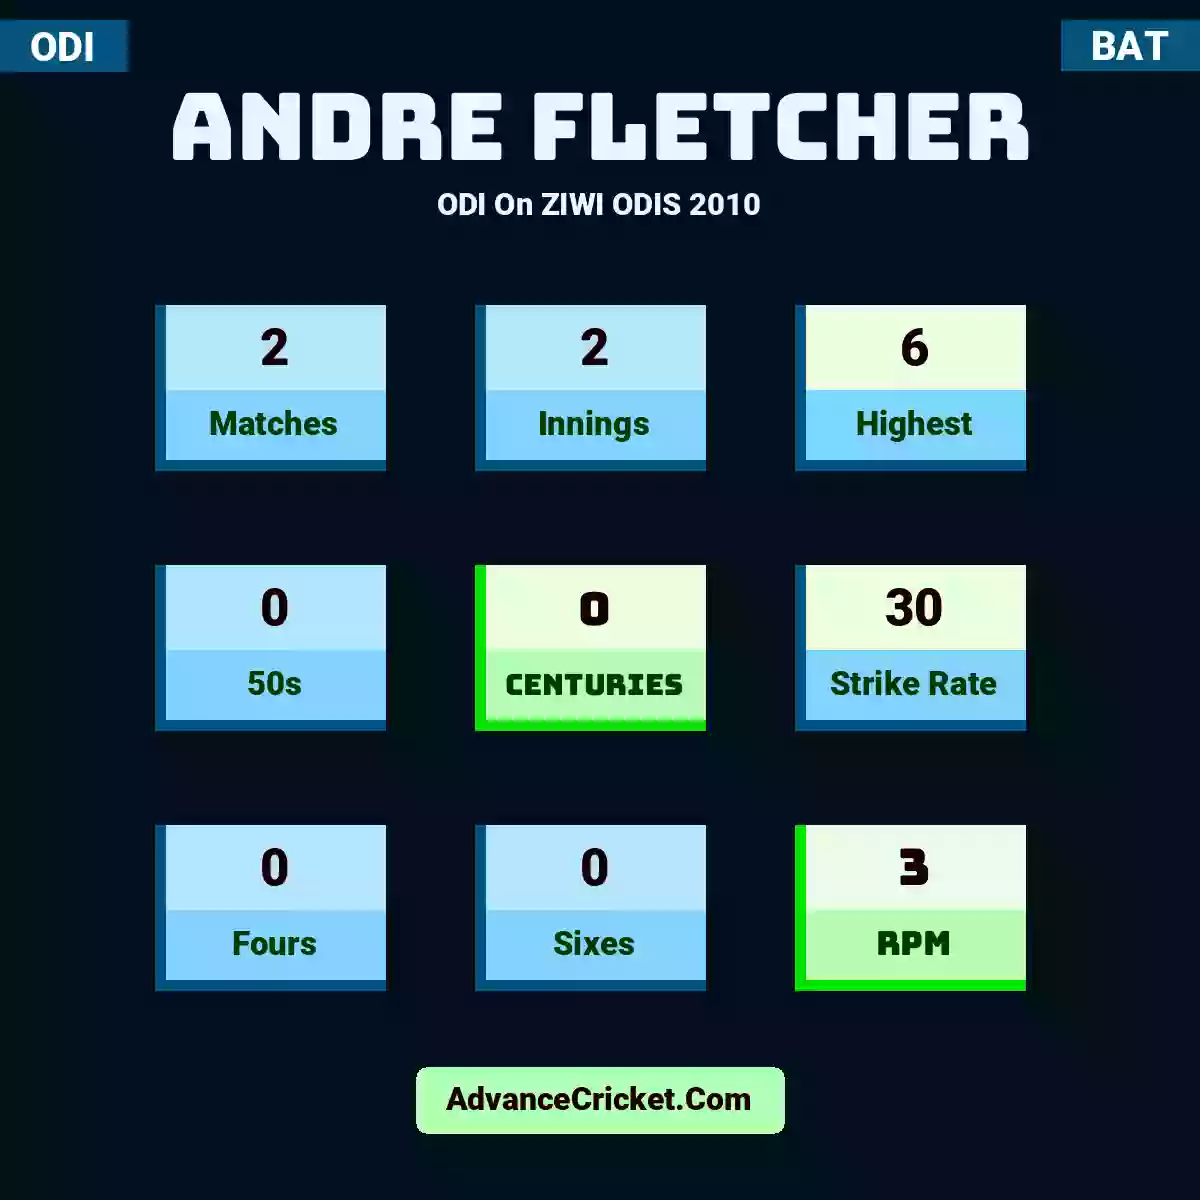 Andre Fletcher ODI  On ZIWI ODIS 2010, Andre Fletcher played 2 matches, scored 6 runs as highest, 0 half-centuries, and 0 centuries, with a strike rate of 30. A.Fletcher hit 0 fours and 0 sixes, with an RPM of 3.